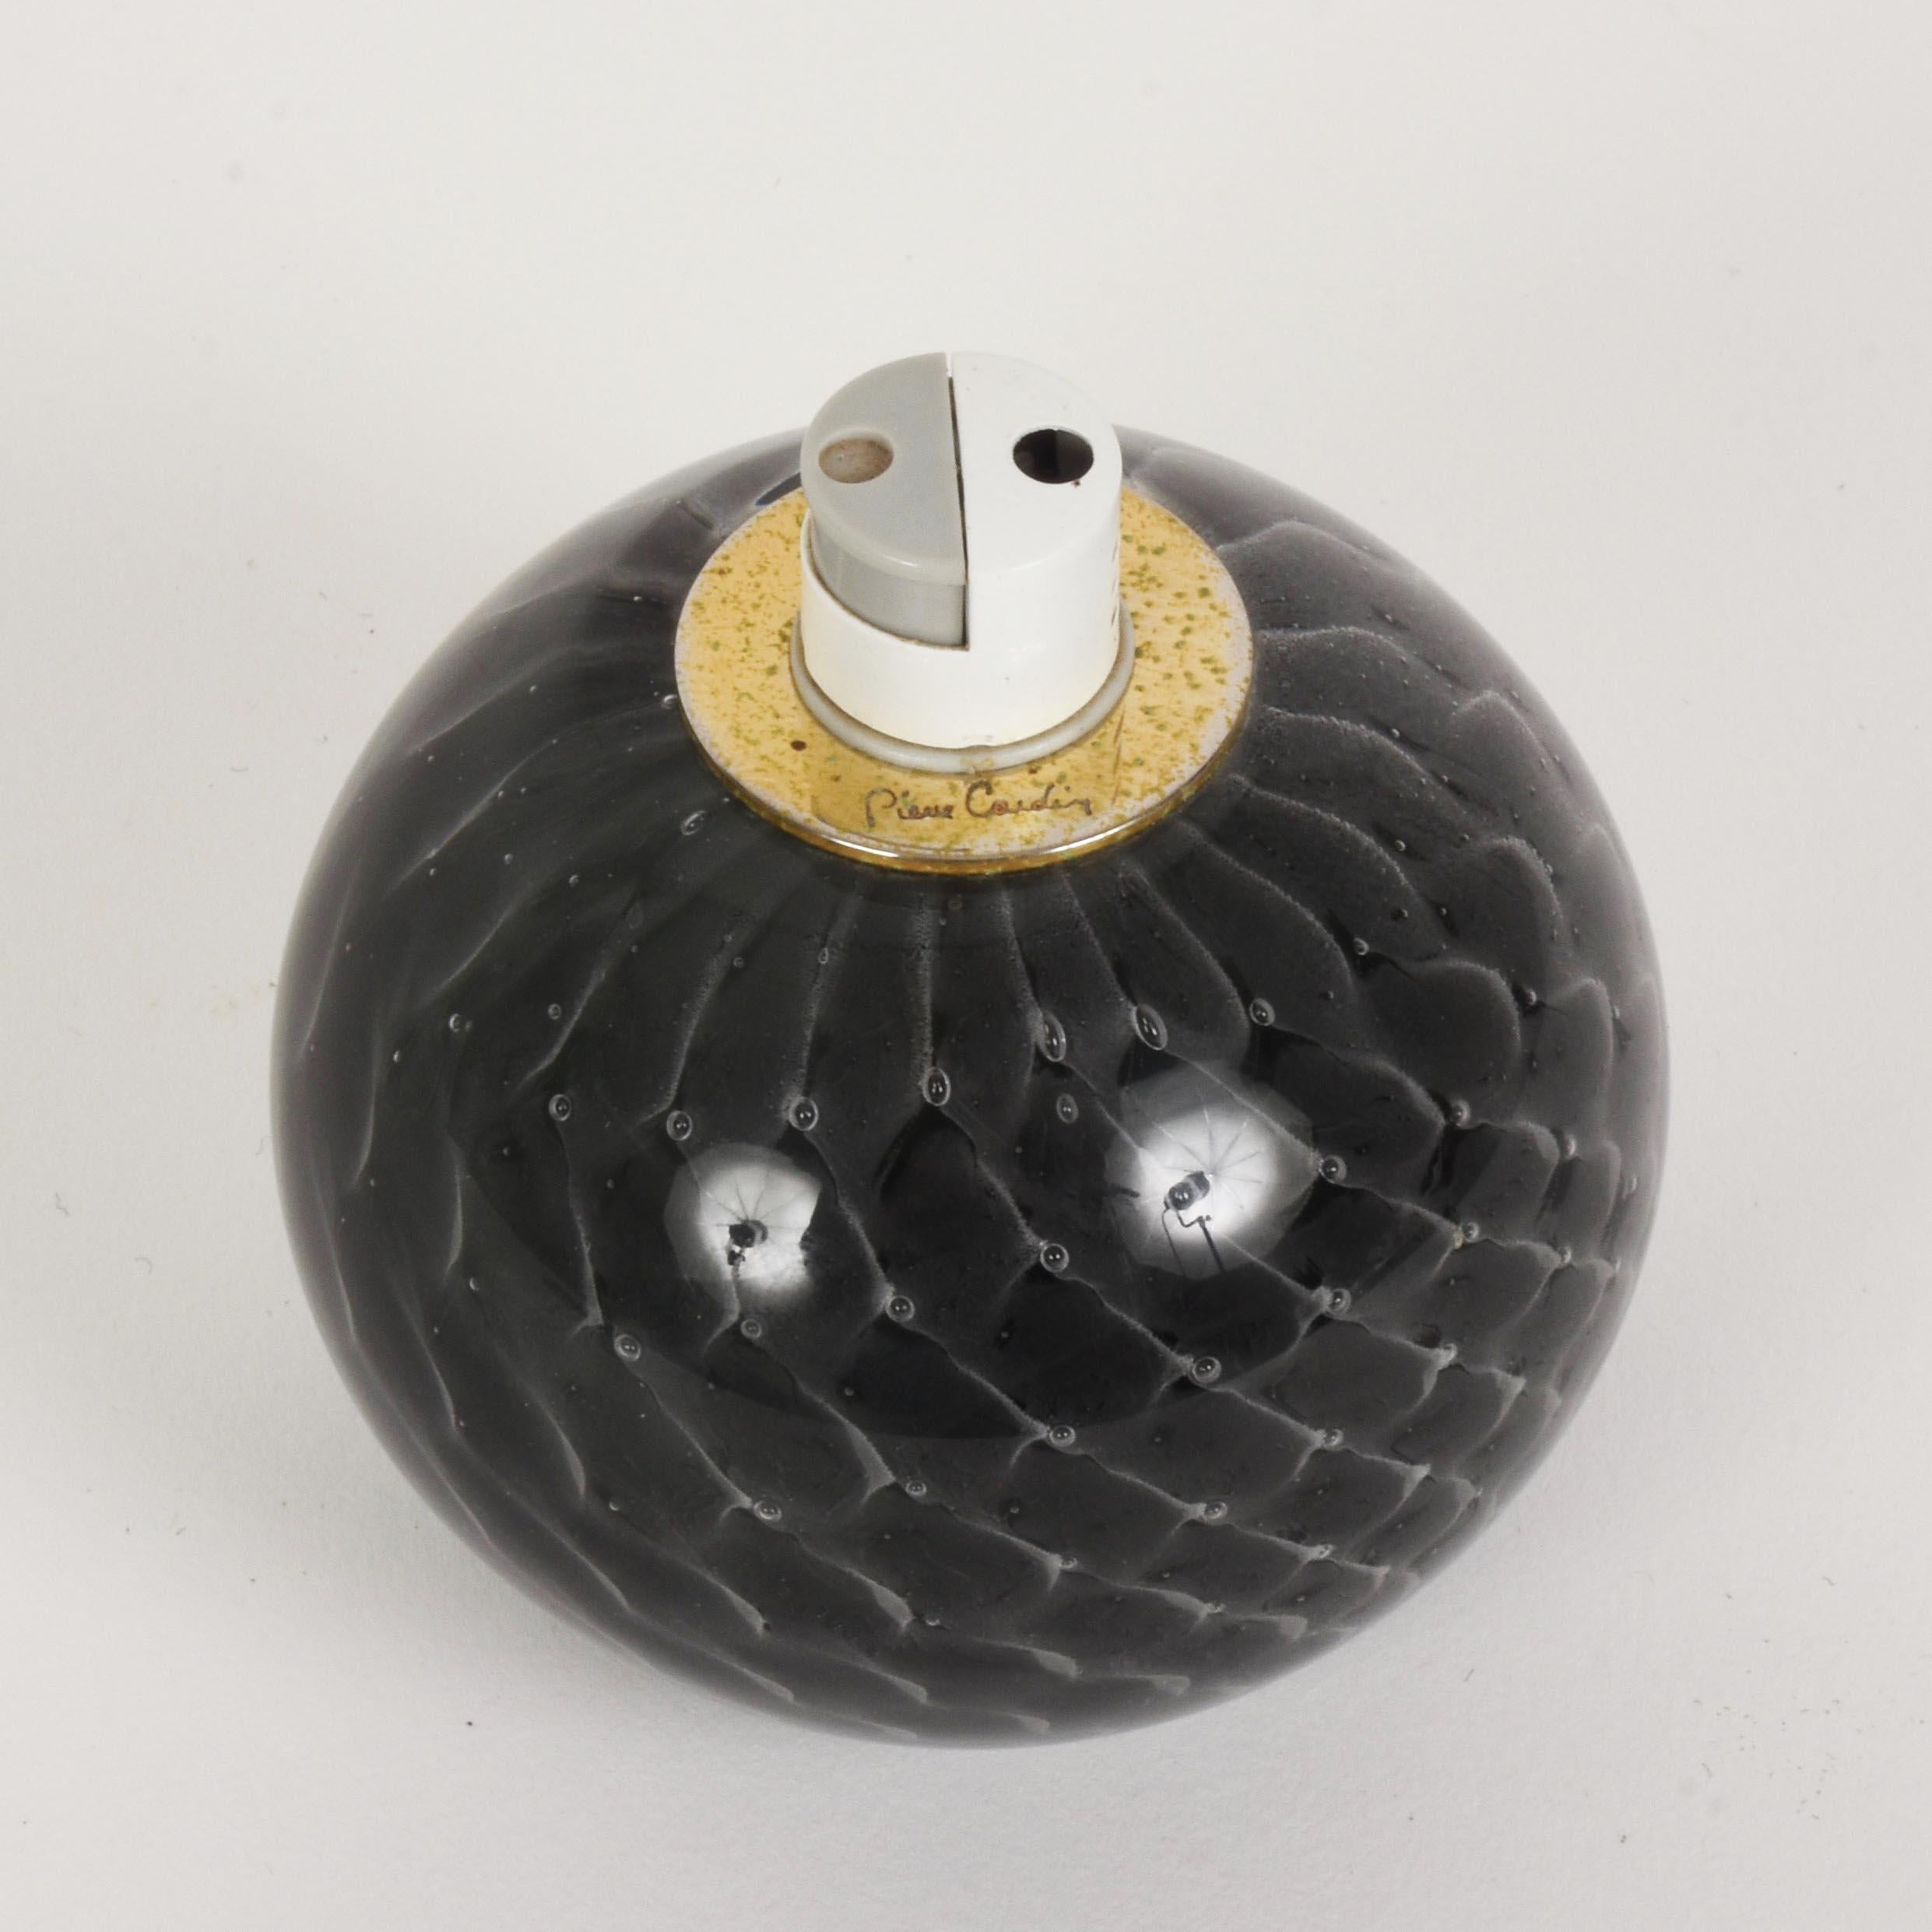 Incredible table lighter in the shape of a glass ball with air bubbles and brass signed Pierre Cardin and made in France in the 1970s.

The item has an infinite fascination for not having been used. It has wonderful round lines.

A precious